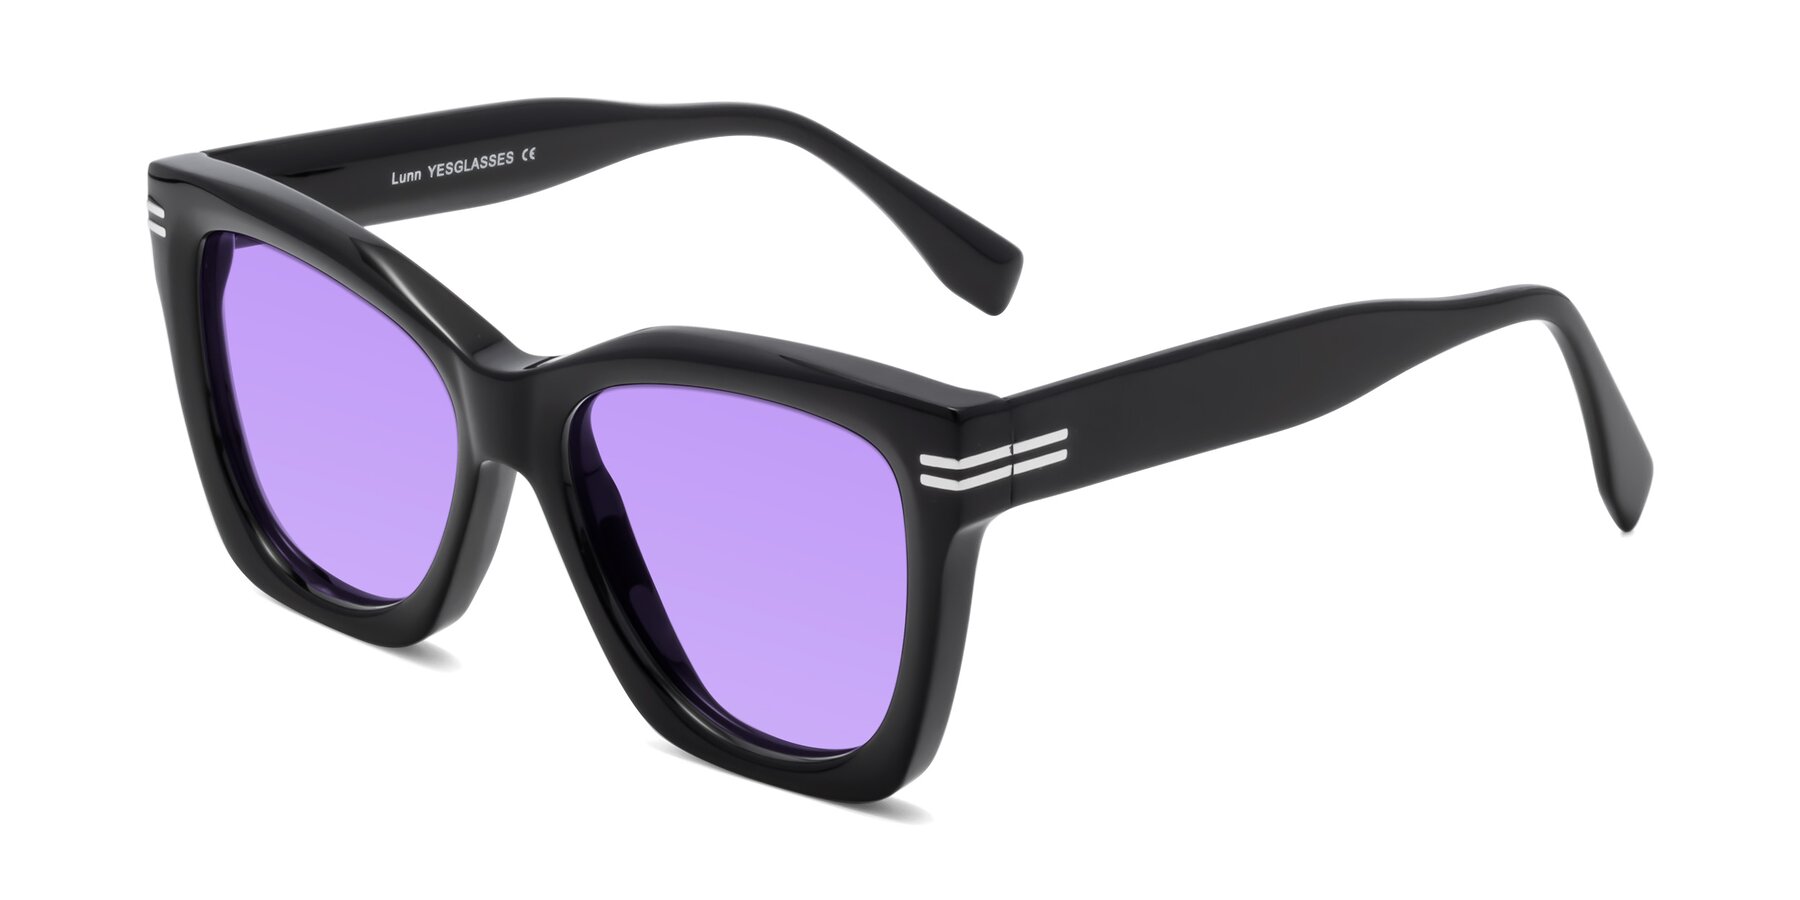 Angle of Lunn in Black with Medium Purple Tinted Lenses